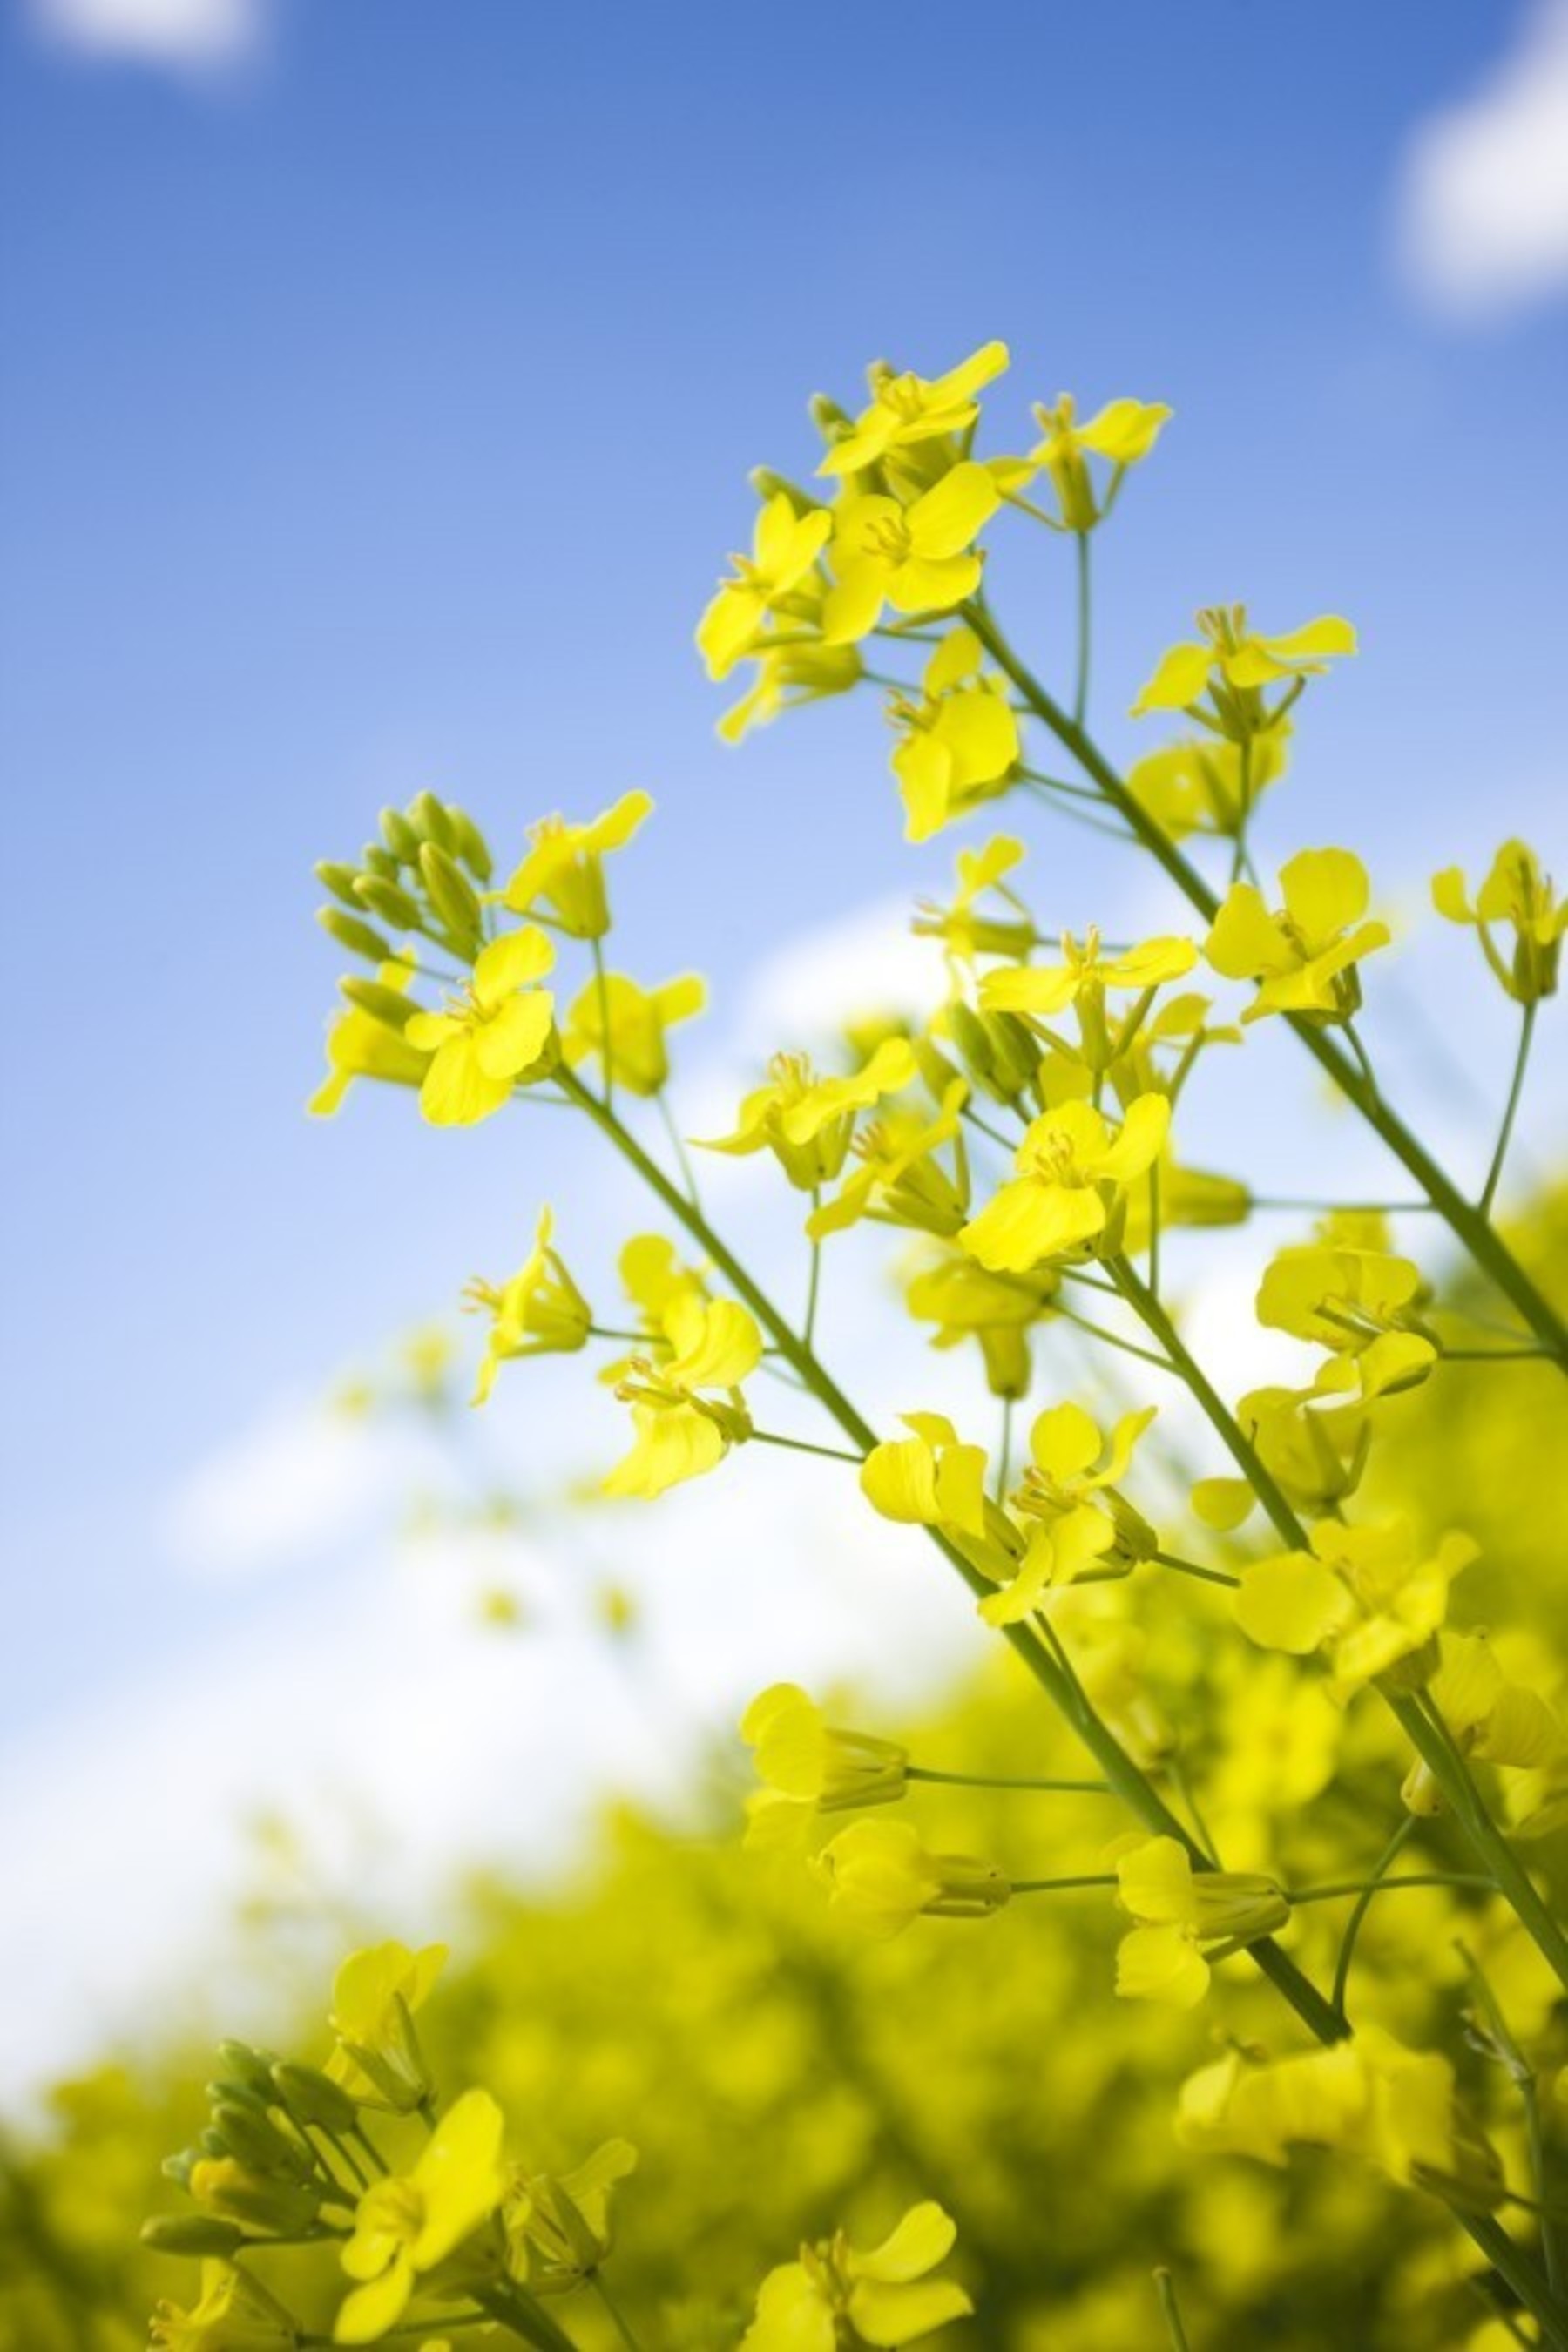 Canola oil comes from the crushed seeds of the canola plant, which is a member of the Brassica family that includes broccoli, cabbage and cauliflower. Research has shown that the oil’s high unsaturated fat content (93 percent) helps lower "bad" LDL cholesterol, thereby reducing the risk of cardiovascular disease. (PRNewsFoto/CanolaInfo)